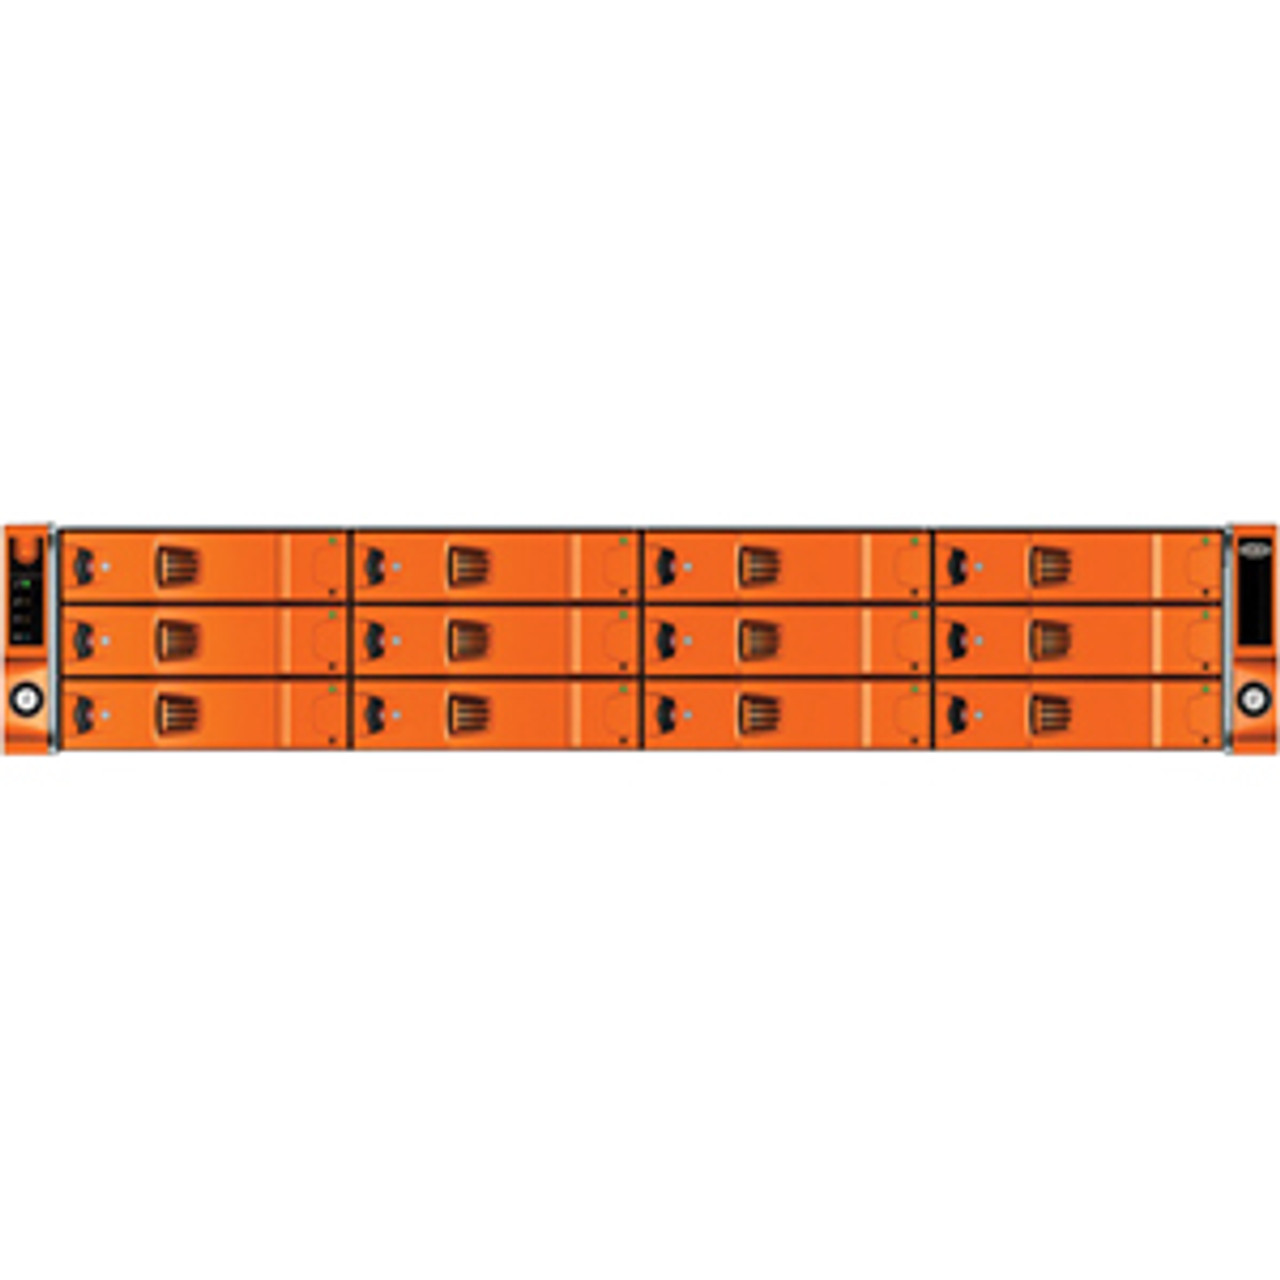 131061 - LaCie Hard Drive Array - Serial Attached SCSI (SAS) Controller - RAID Supported - 12 x Total Bays Rack-mountable